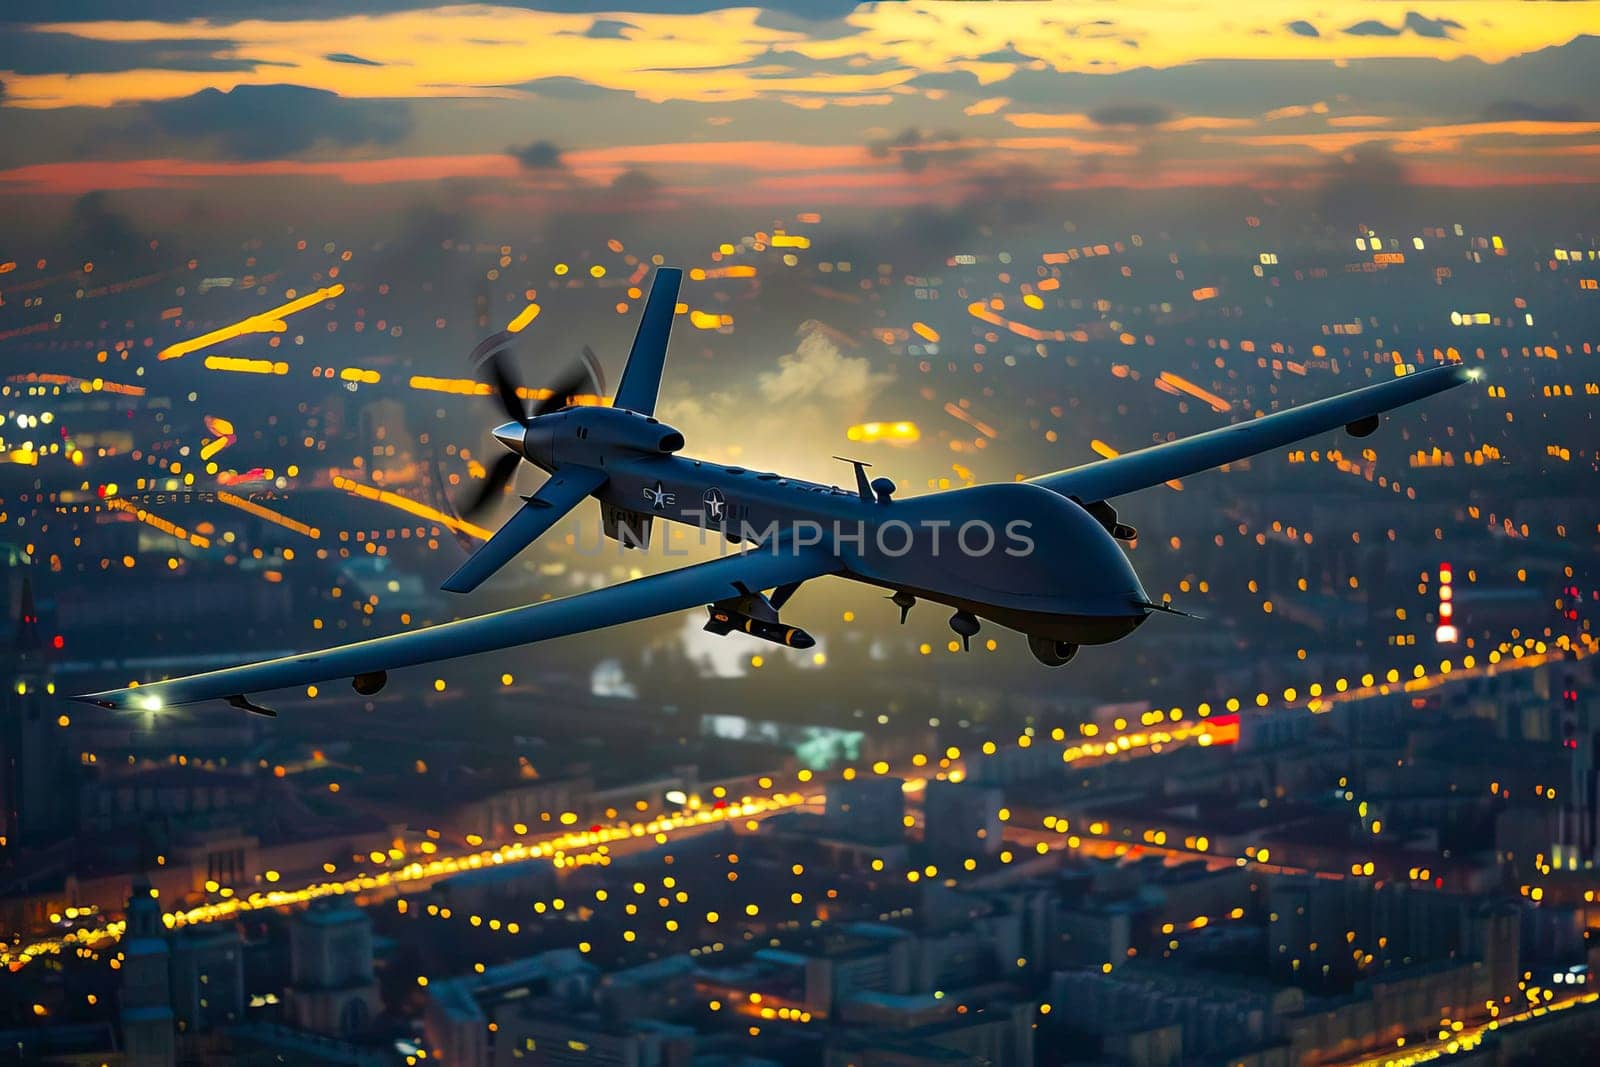 Military airplane is seen soaring over a city landscape during the dark hours of the night